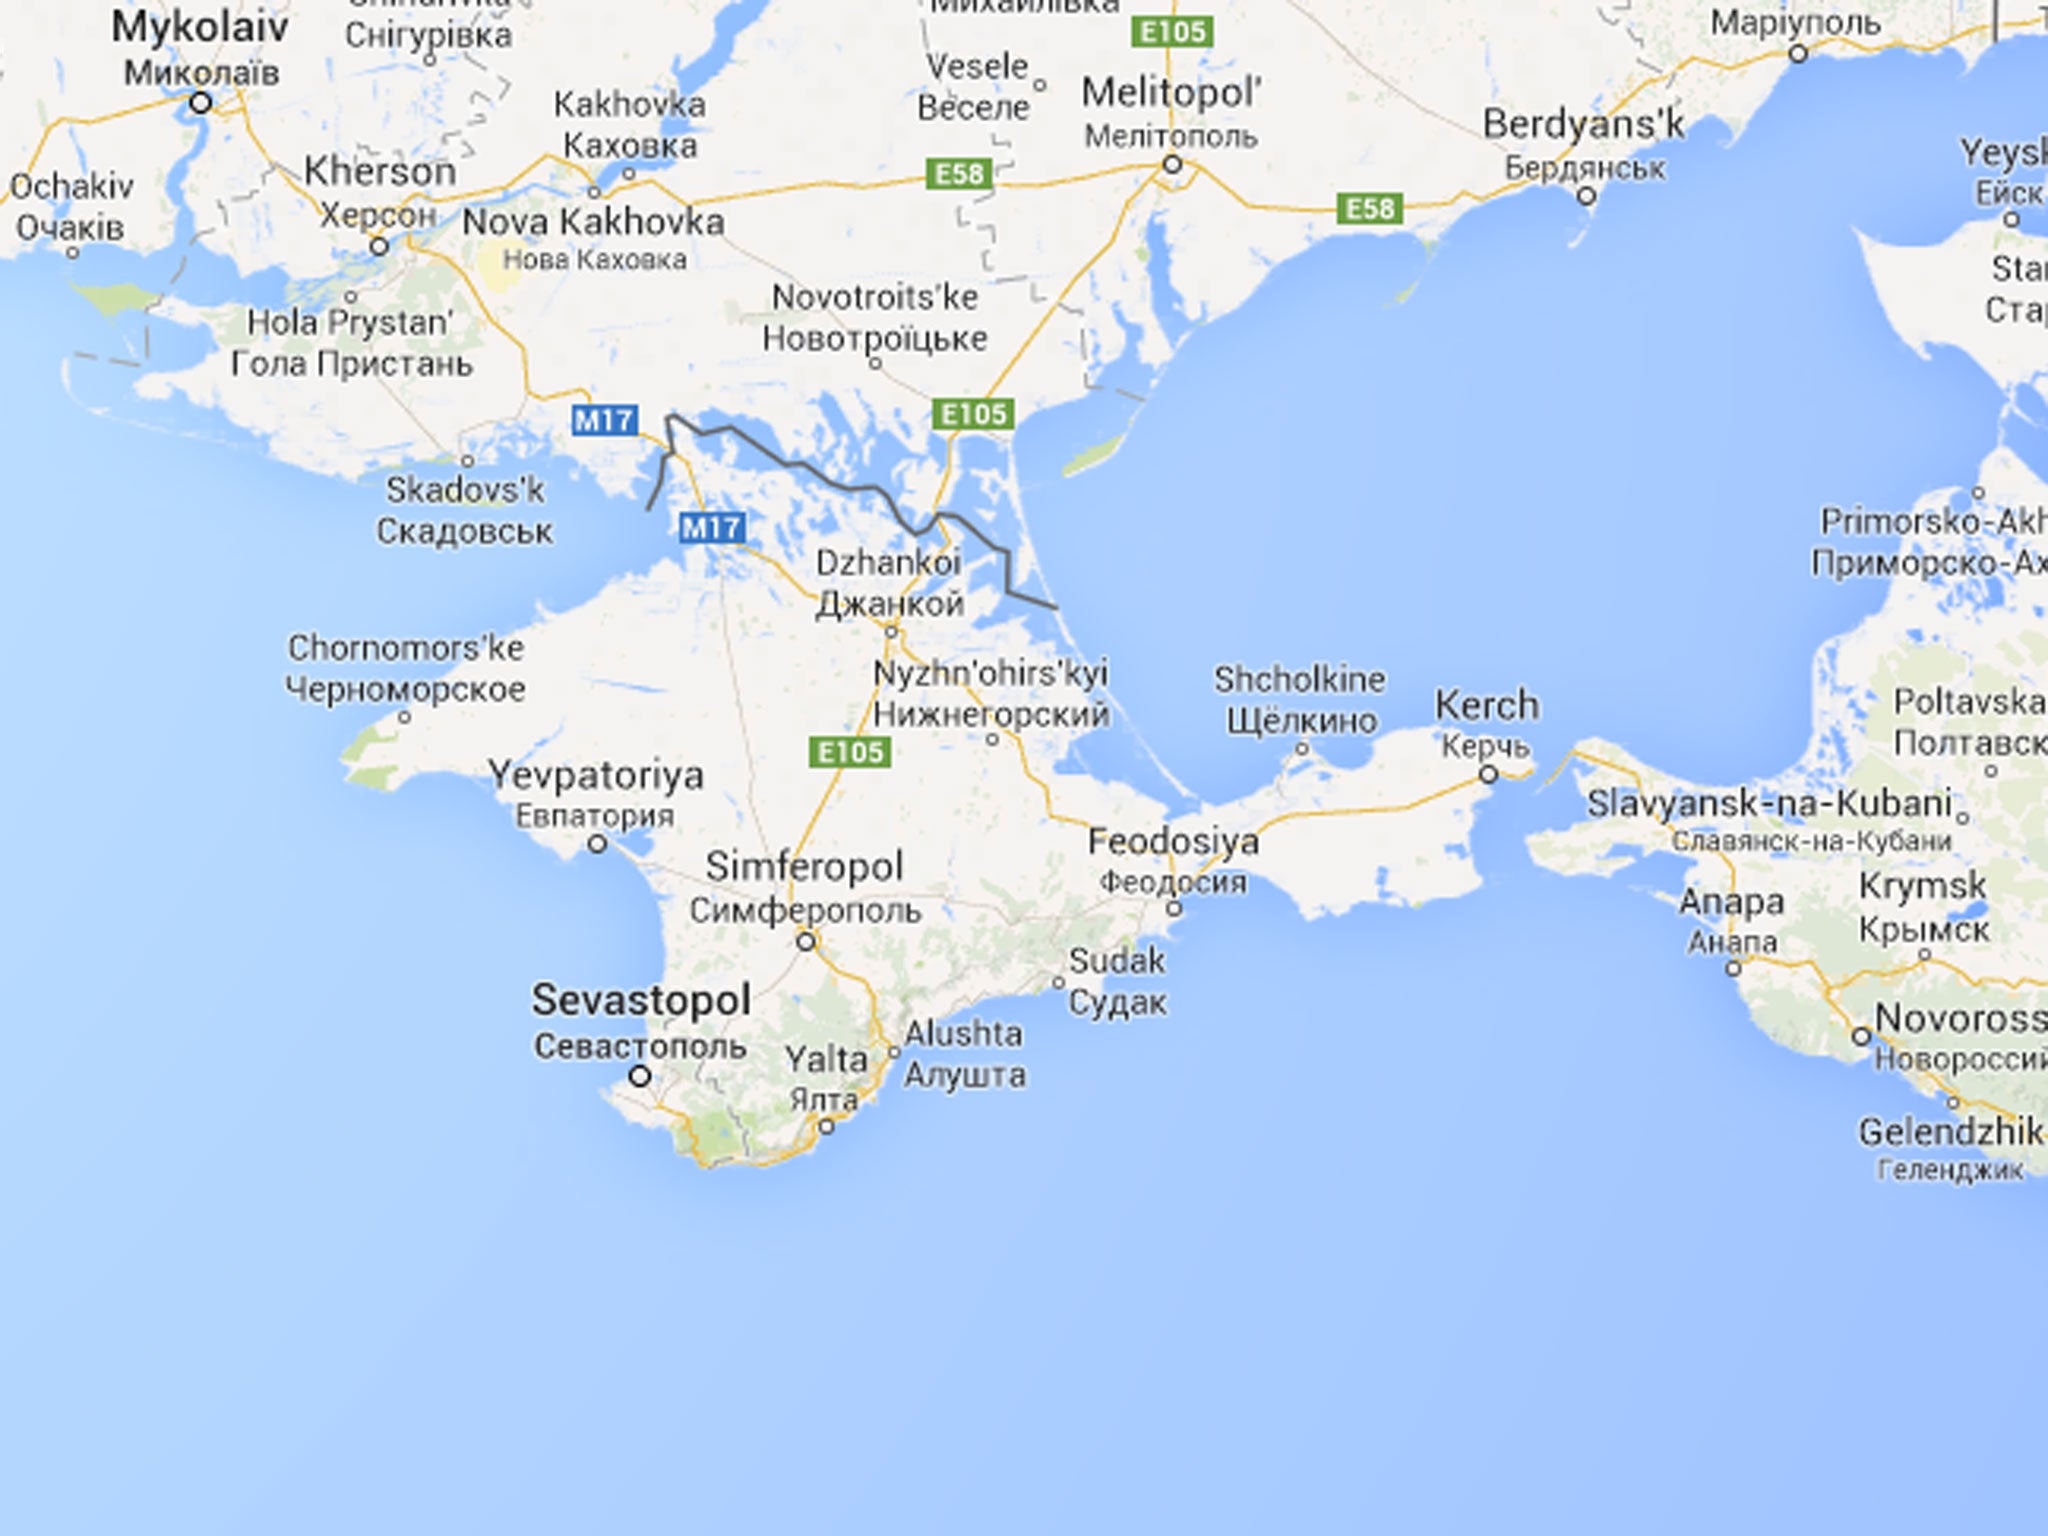 Crimea now appears as part of Russia on Google Maps - for Russian users at least - with a solid border between it and Ukraine